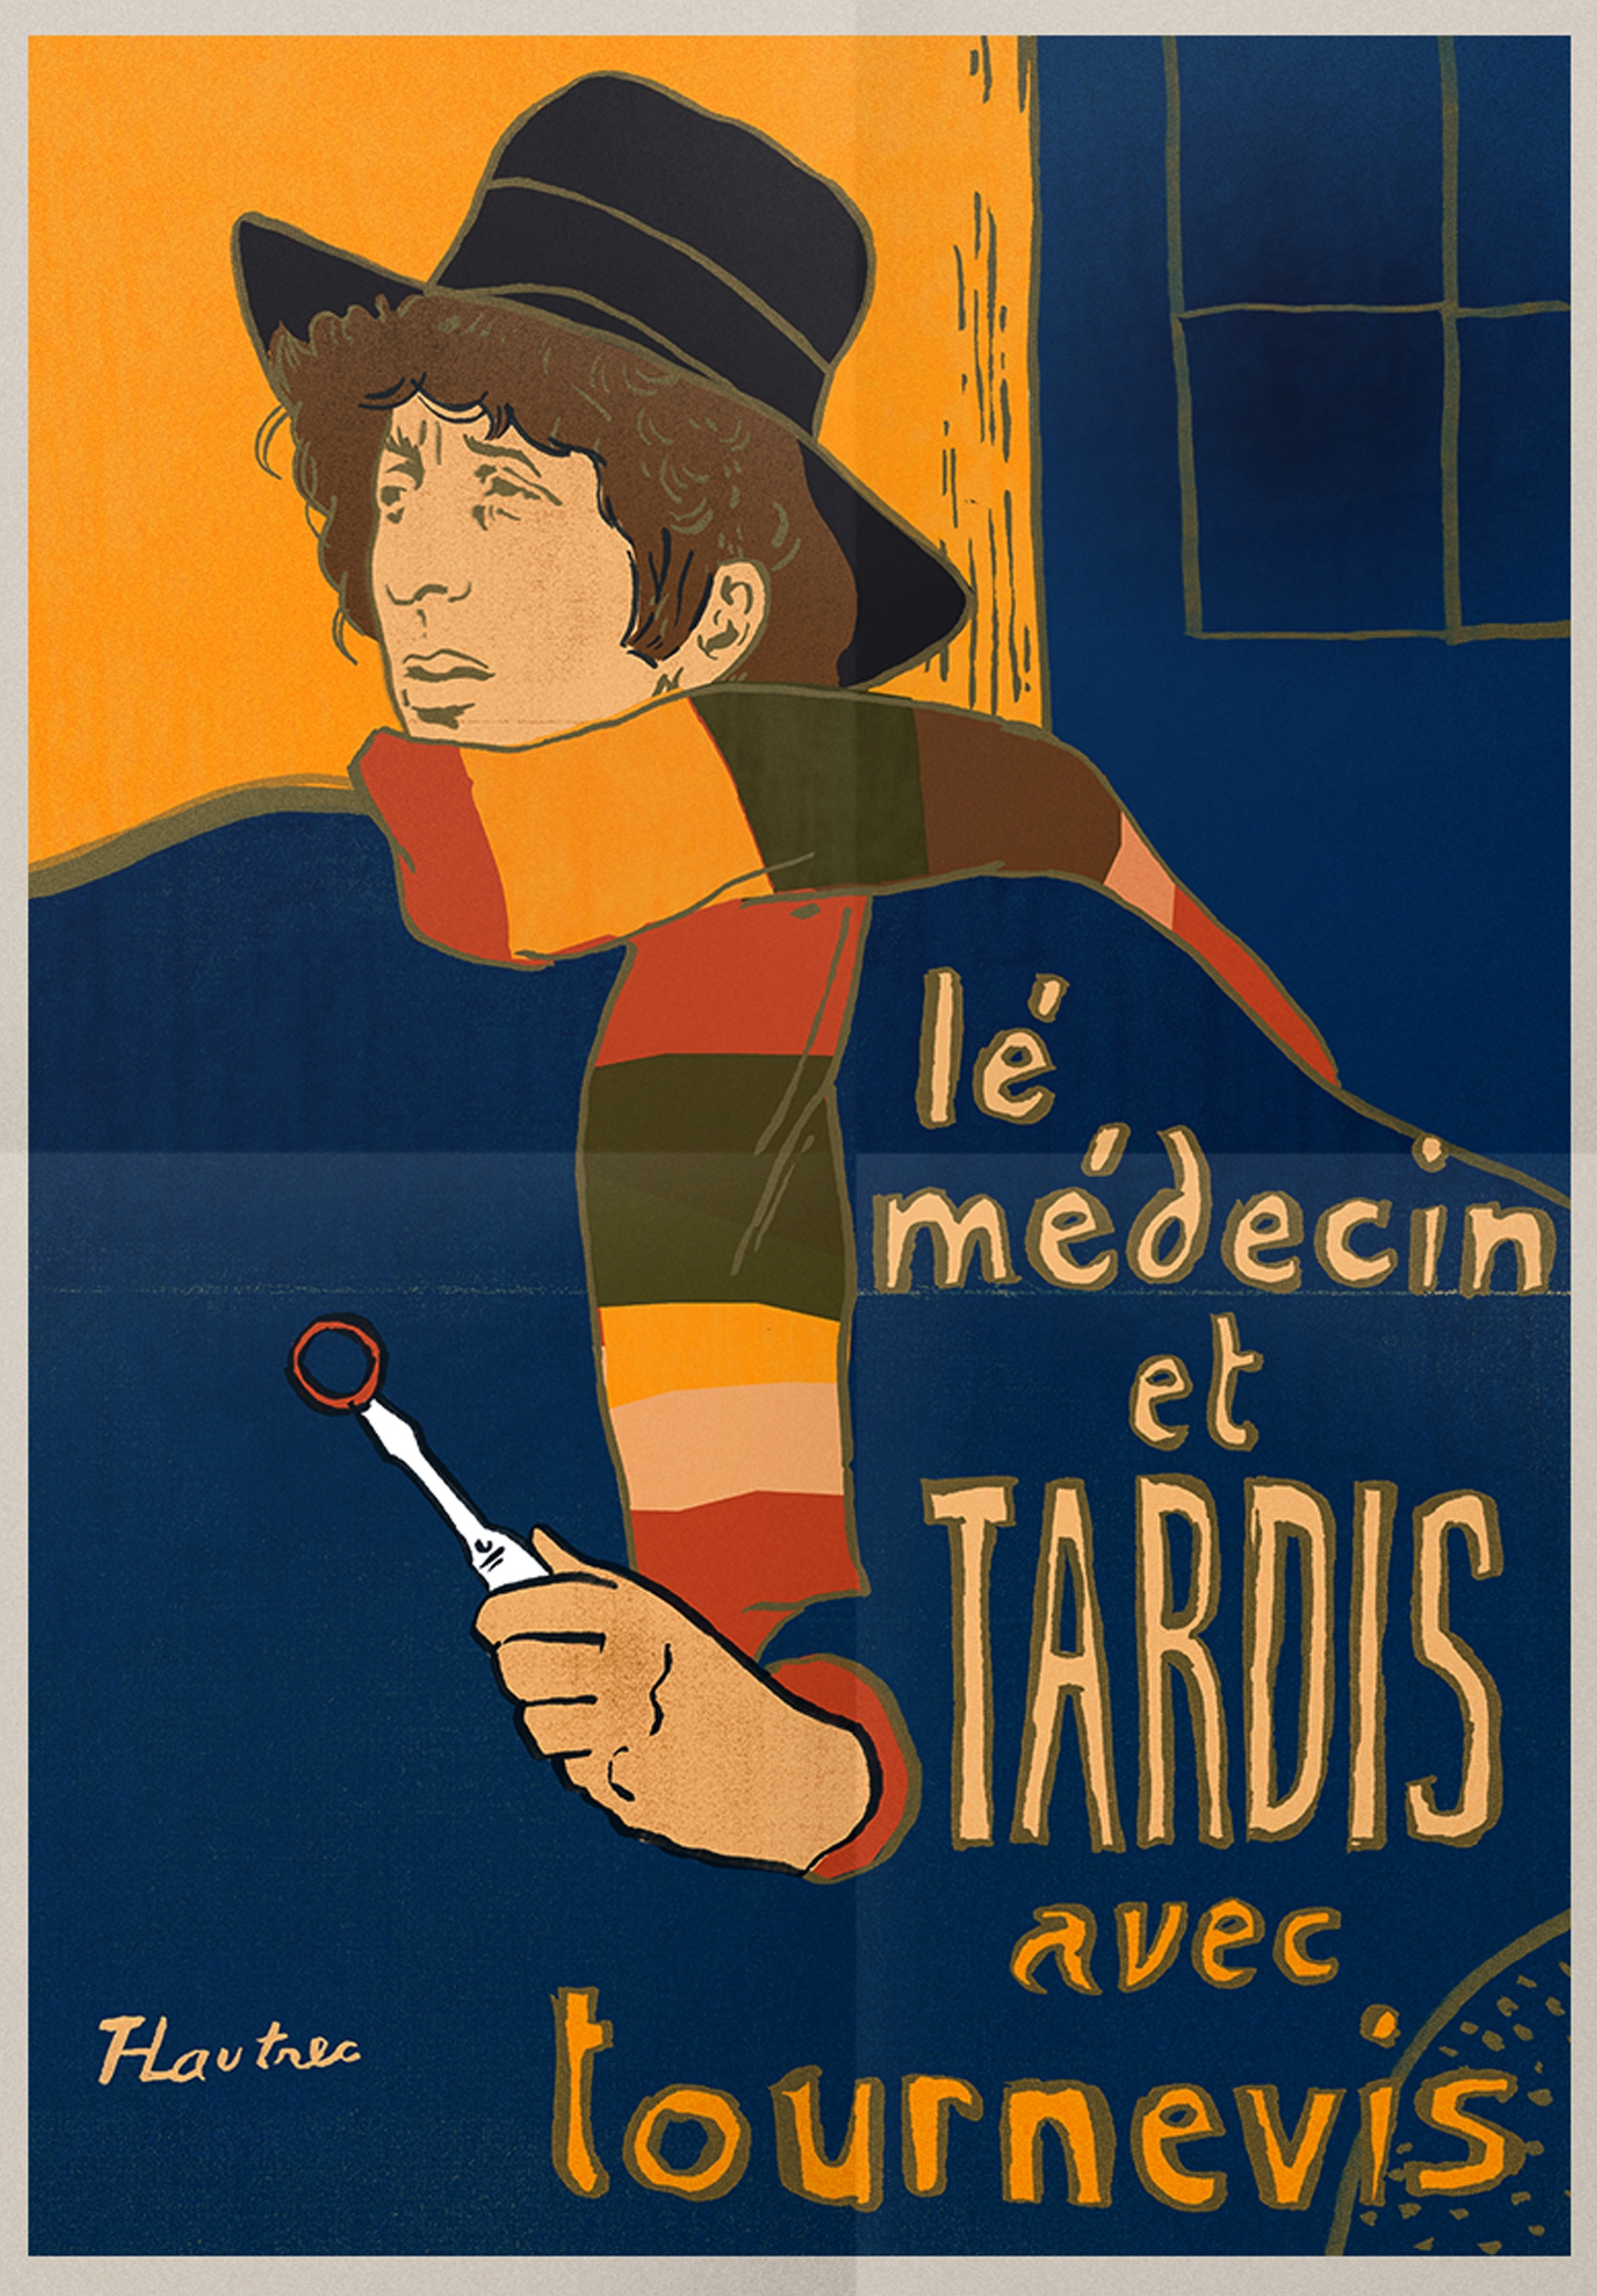 Illustration of Fourth Doctor as Illustrated by Toulouse-Lautrec